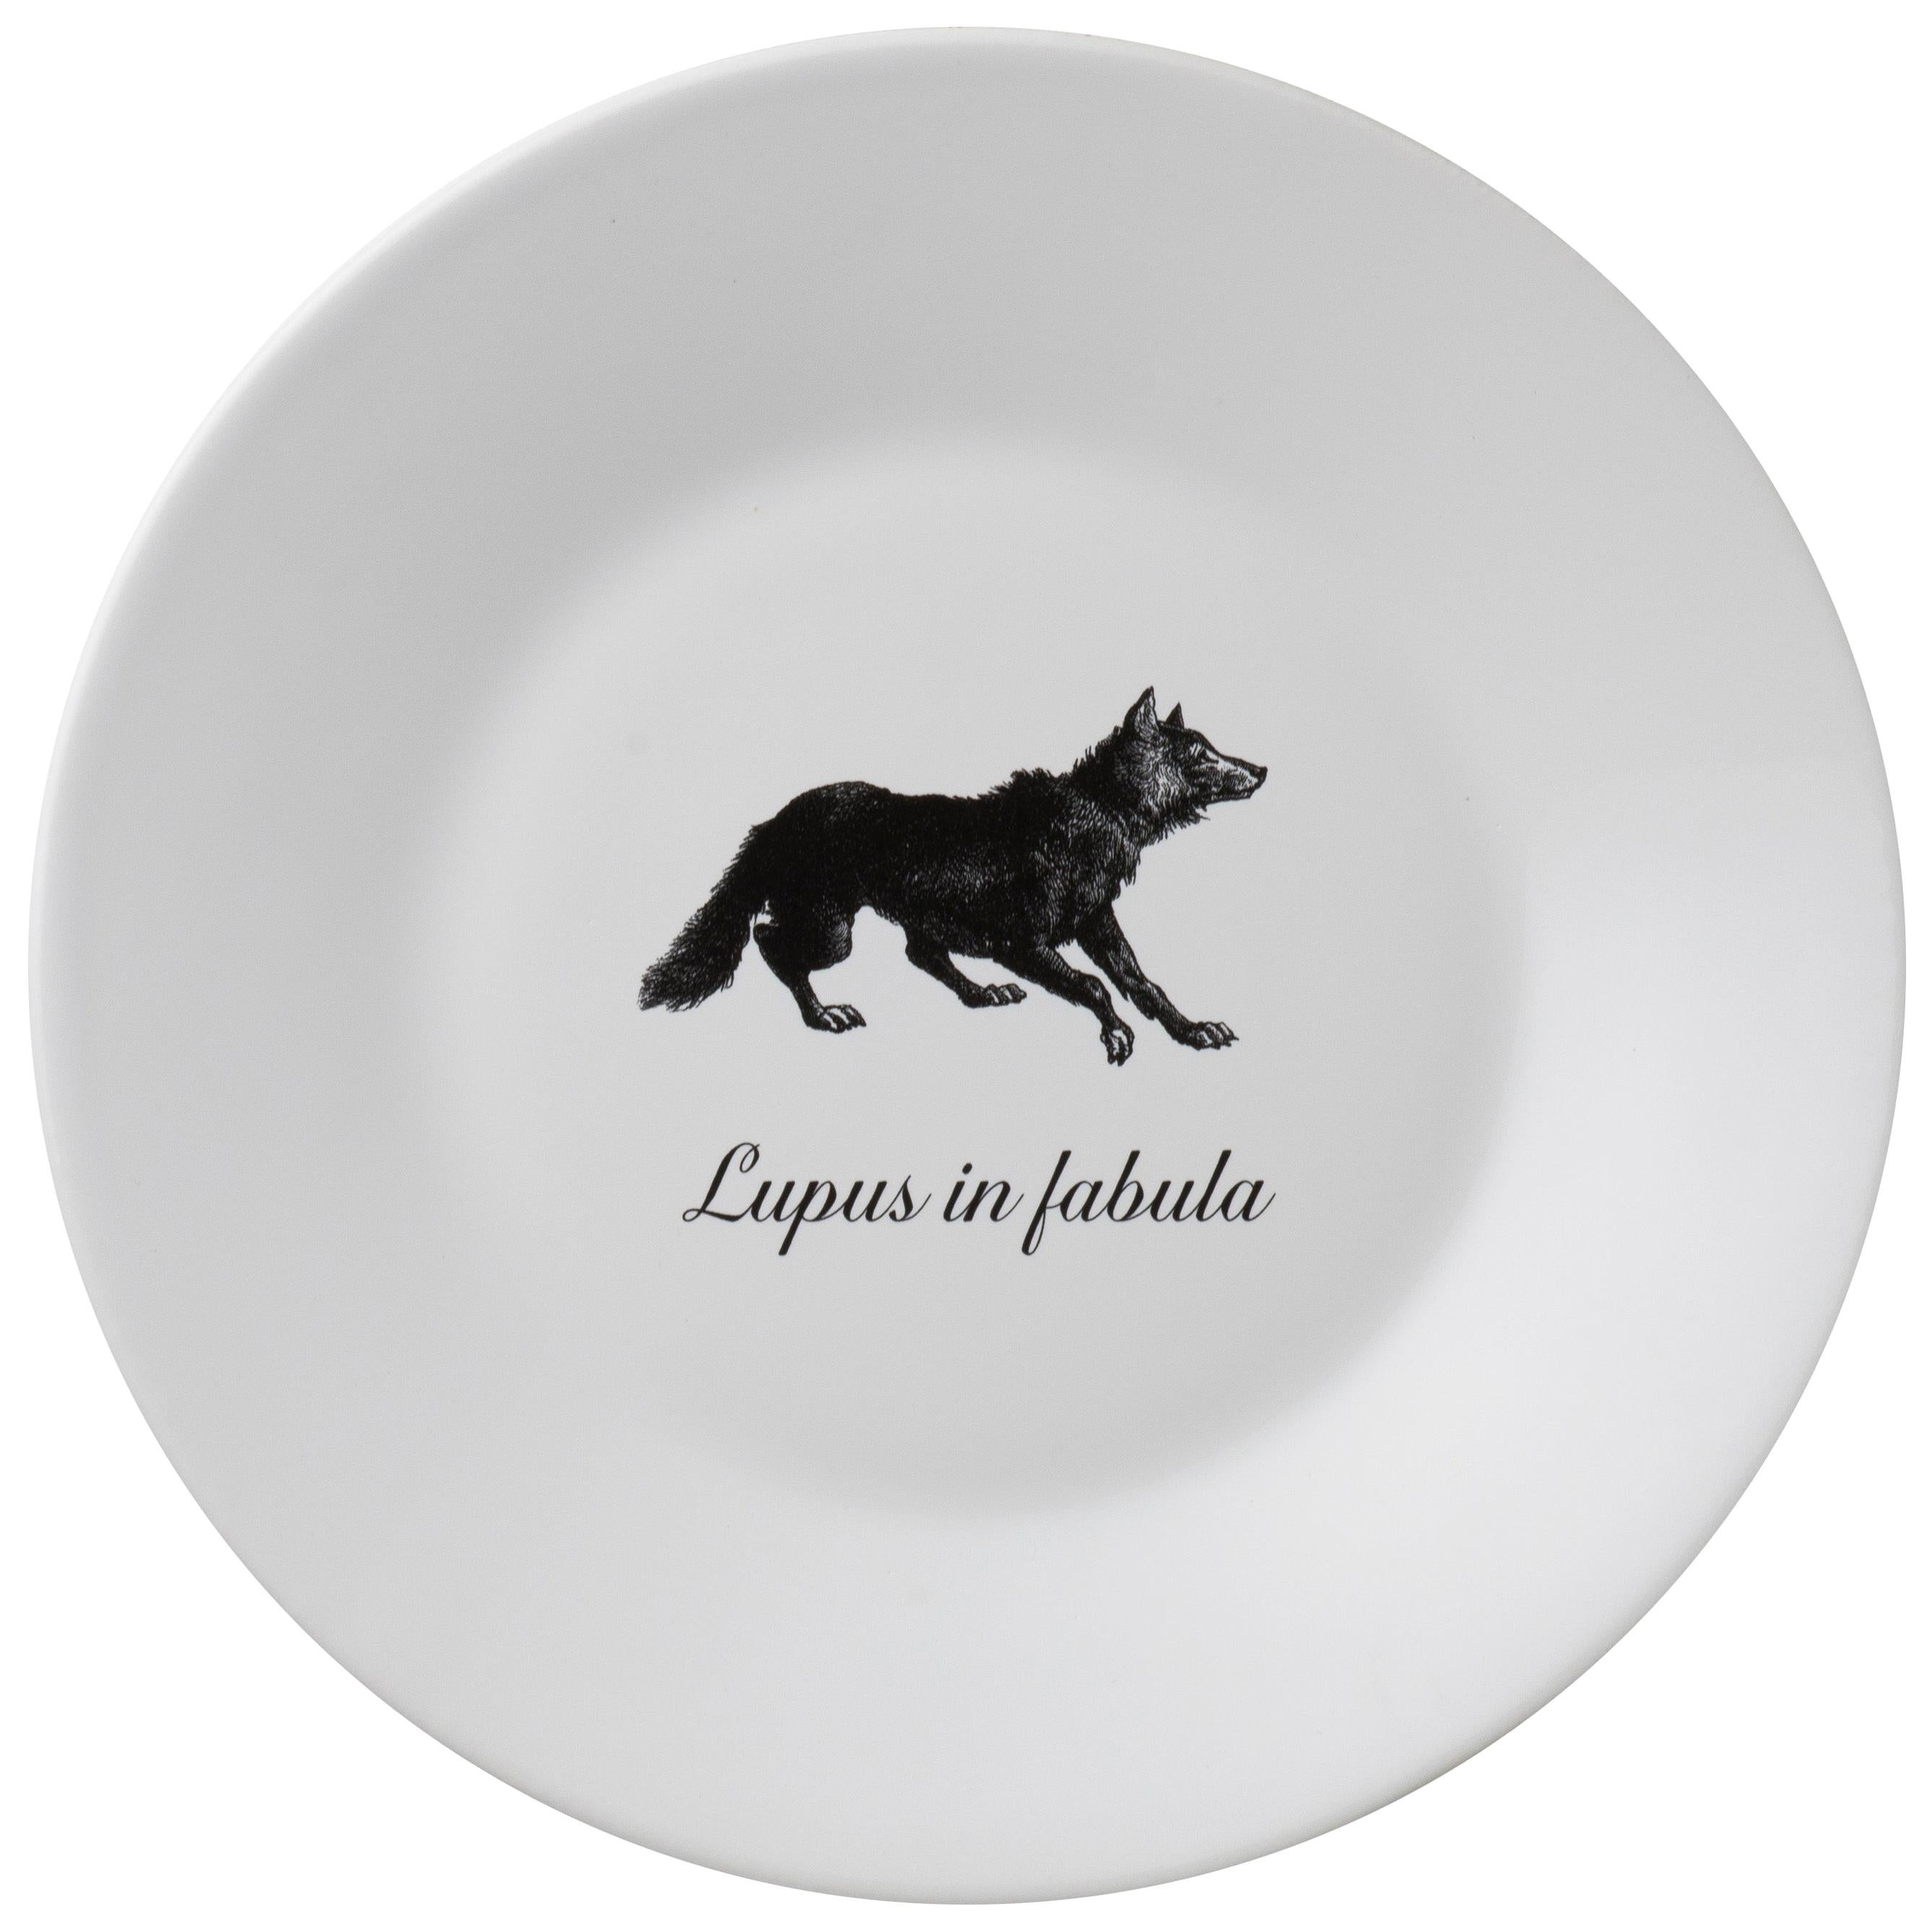 "Ipse Dixit", Crafted in Italy Set of Dessert Plates with Famous Latin Mottos For Sale